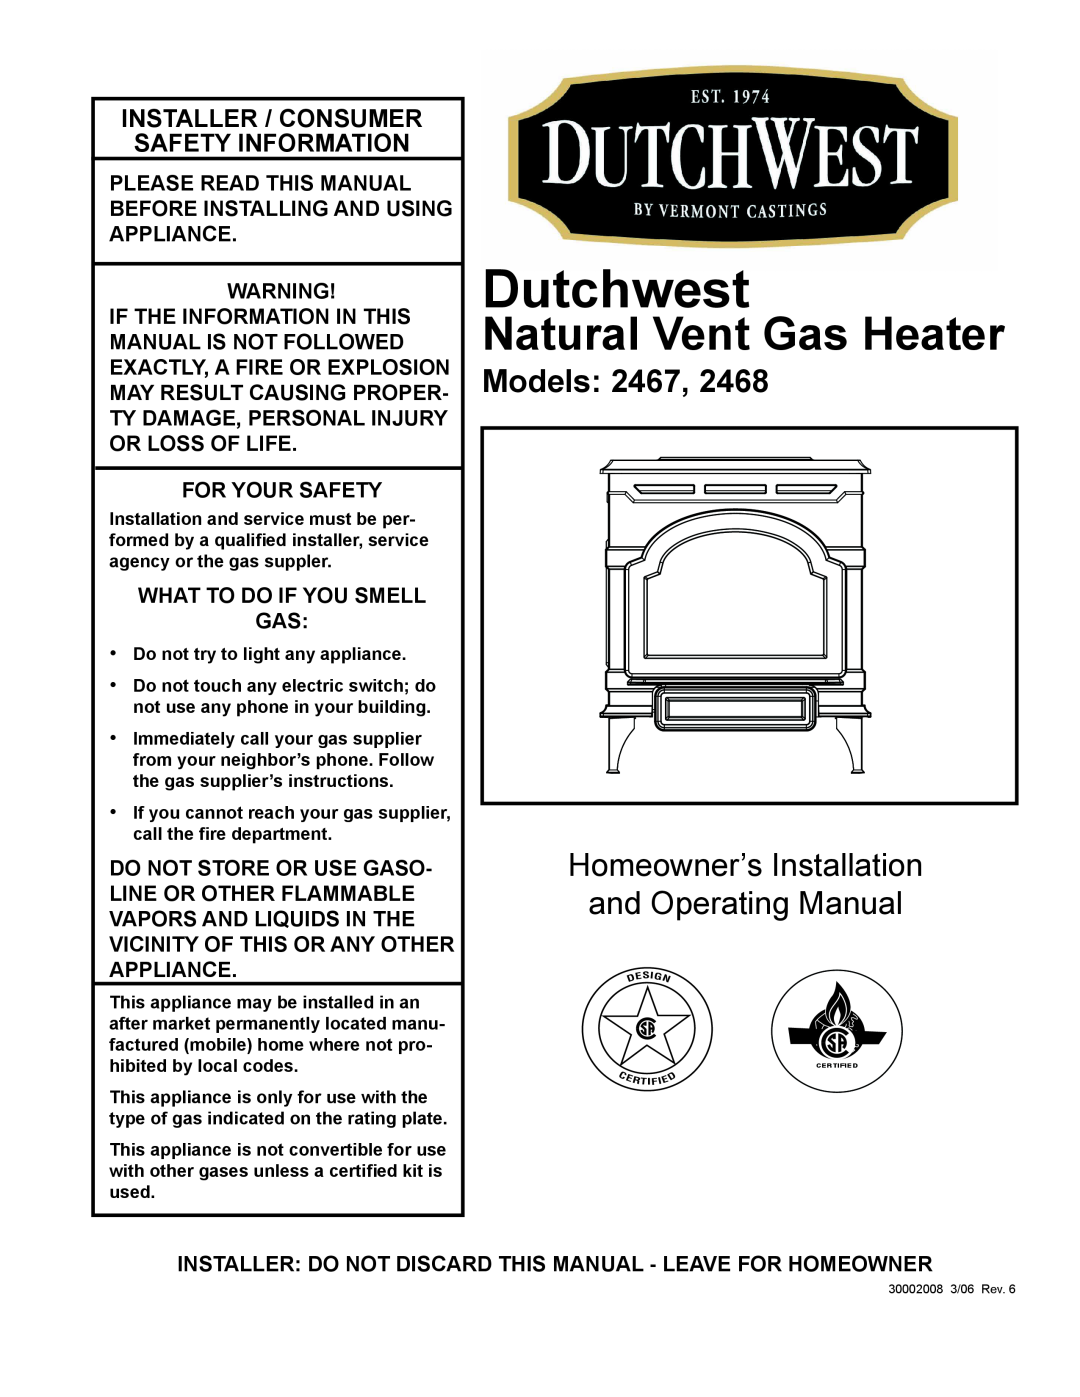 Vermont Casting 2468 manual Models, Dutchwest, Natural Vent Gas Heater, Homeowner’s Installation and Operating Manual 